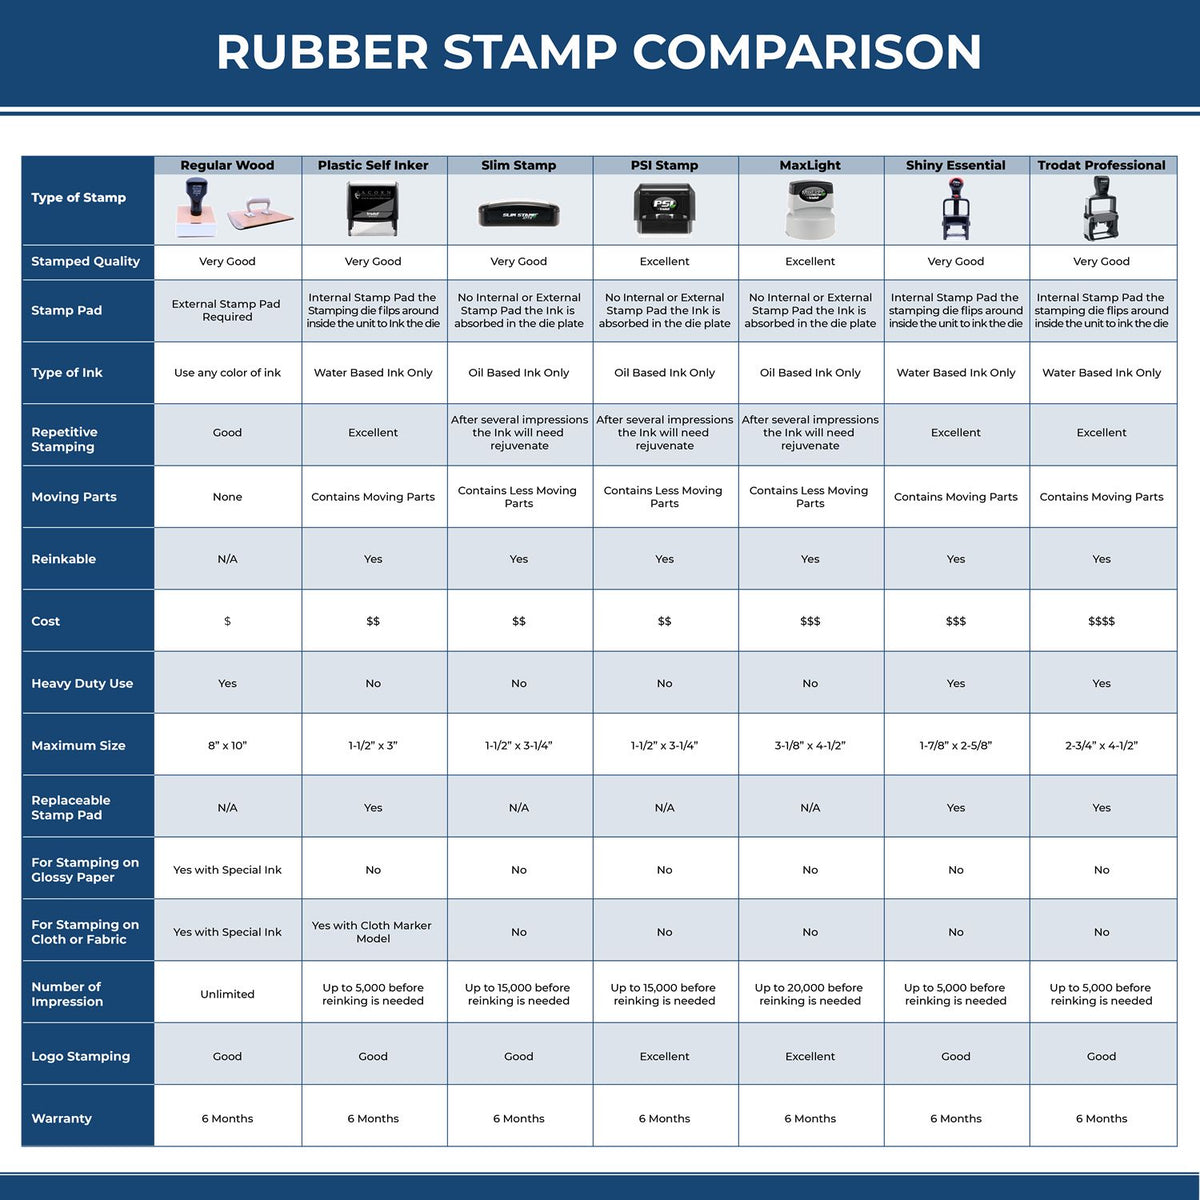 Large Posted with Thumbtack Rubber Stamp 5664R Rubber Stamp Comparison